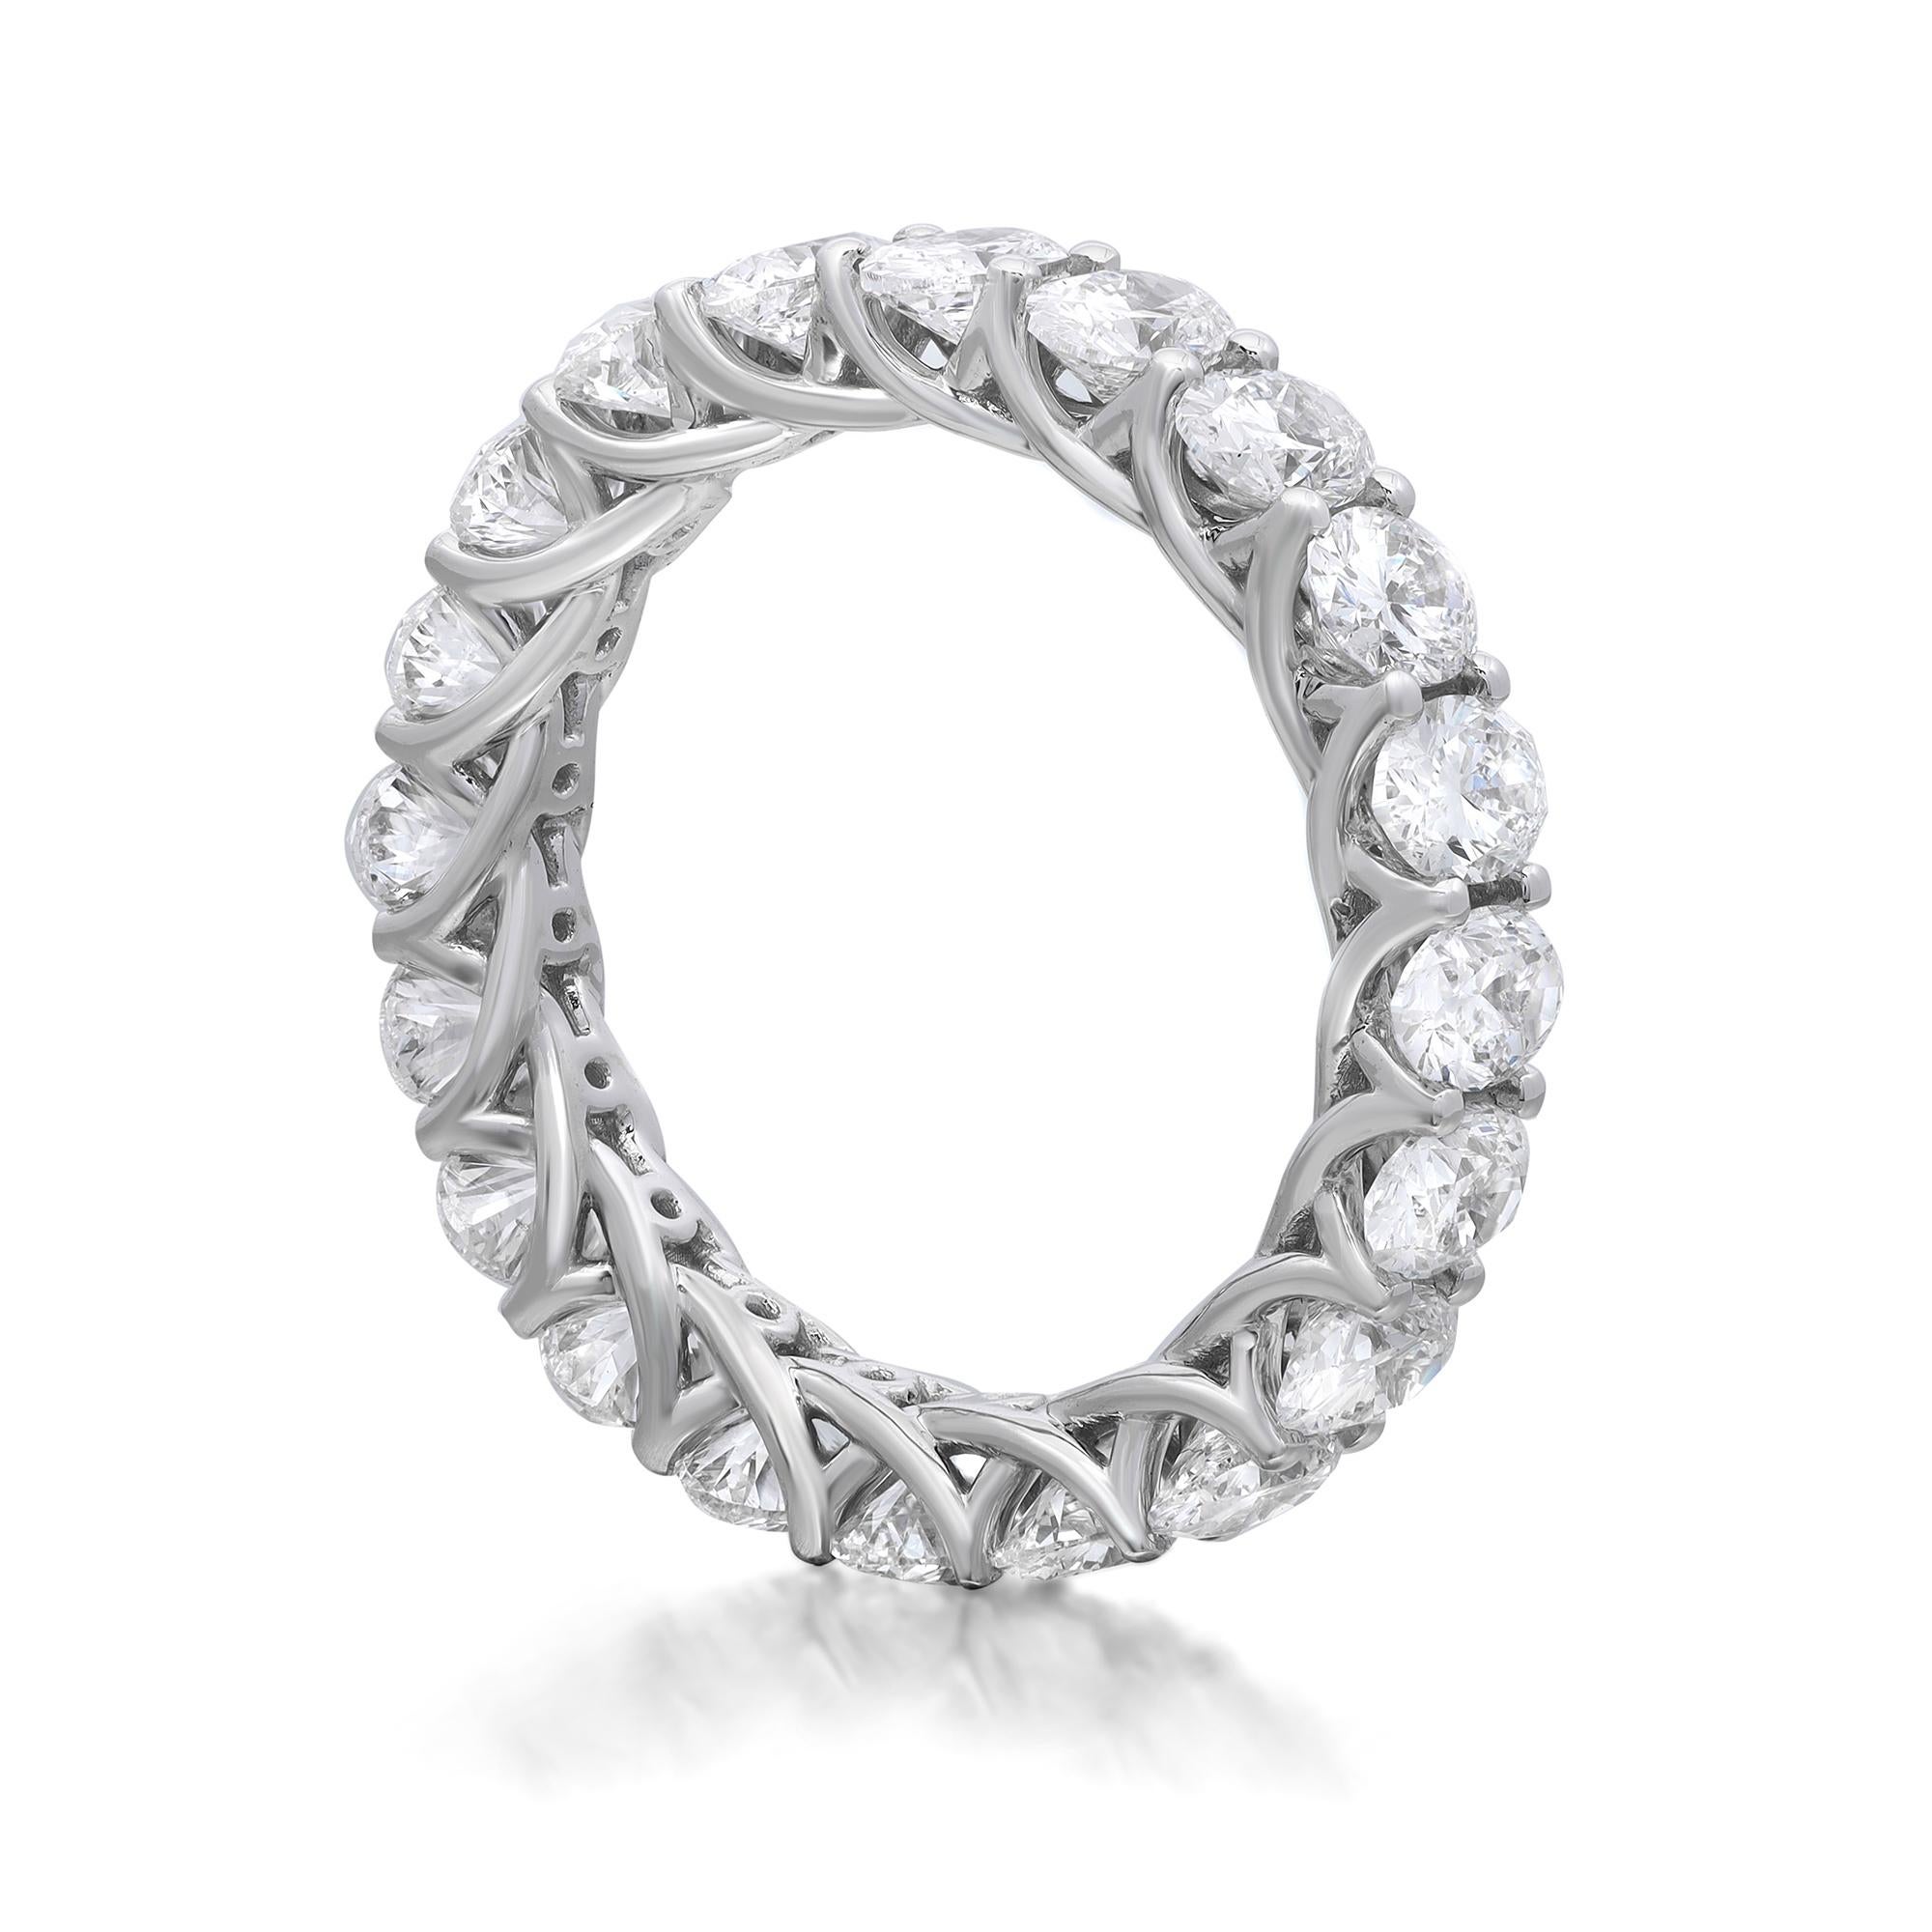 This diamond eternity band ring is a beautiful take on a classic style. It features 20 oval cut sparkling diamonds encrusted in prong setting. Crafted in fine 18K white gold. Total diamond weight: 4.00 carats. Diamond quality: color G-H and clarity